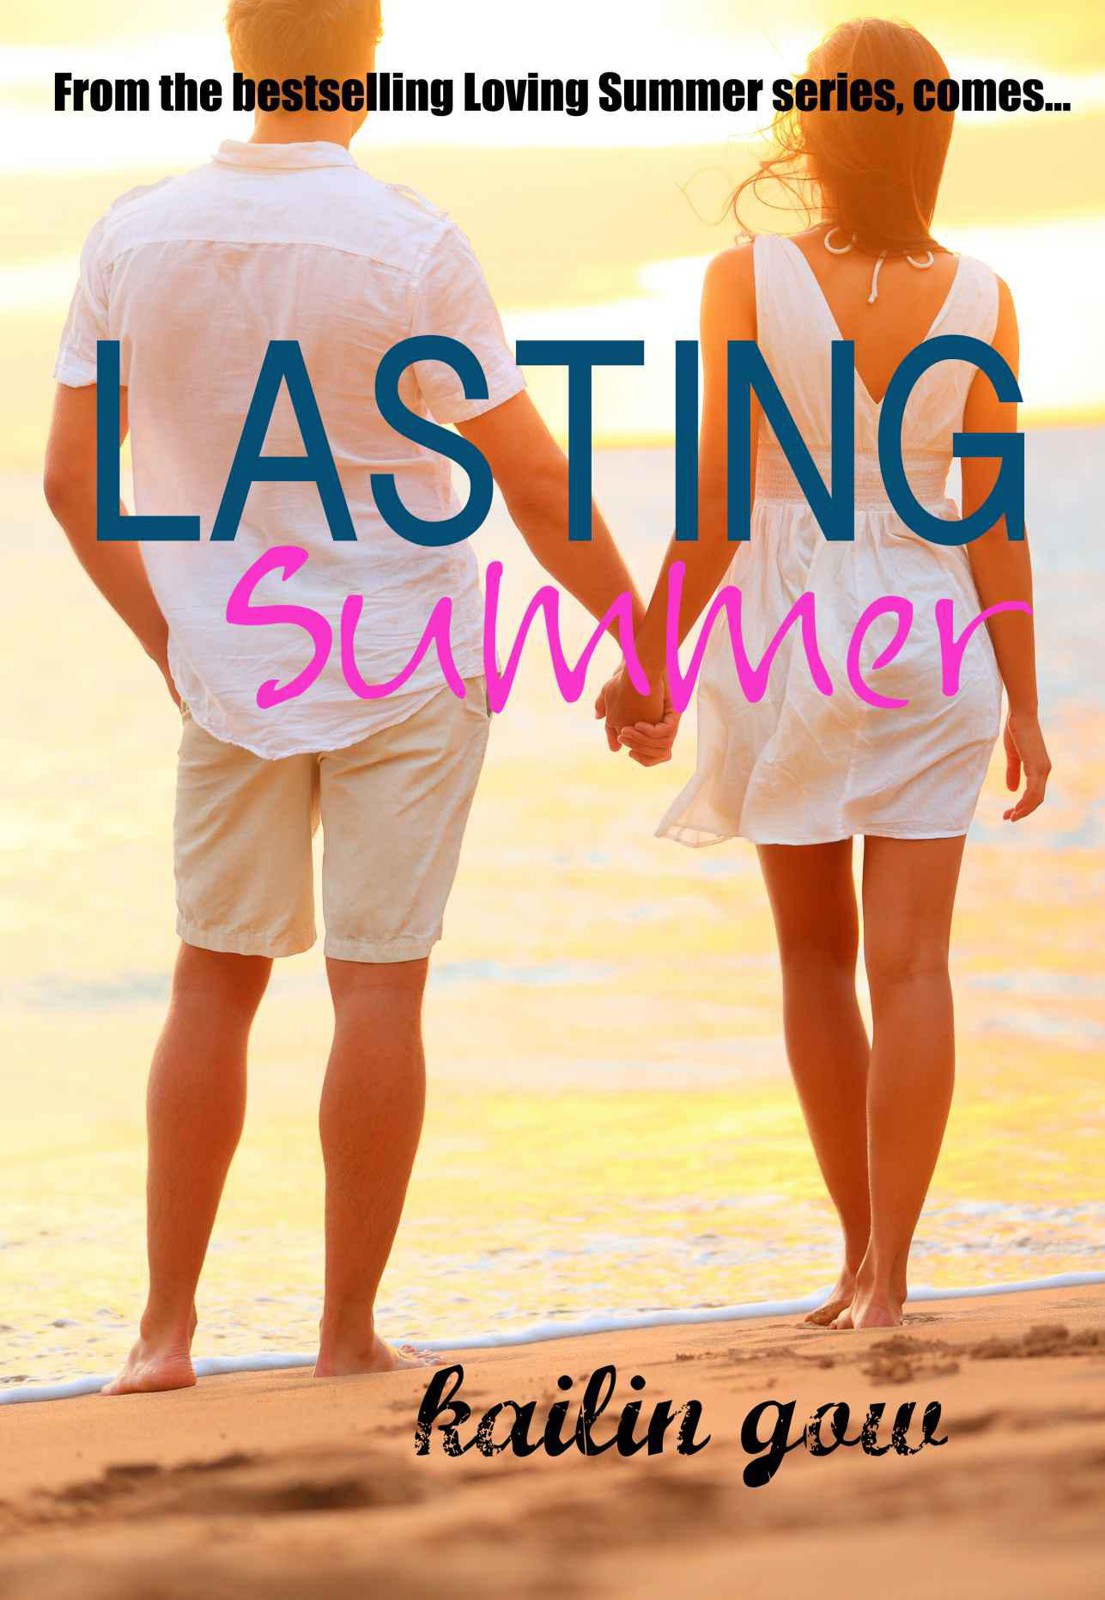 Lasting Summer - [Loving Summer 05] by Kailin Gow